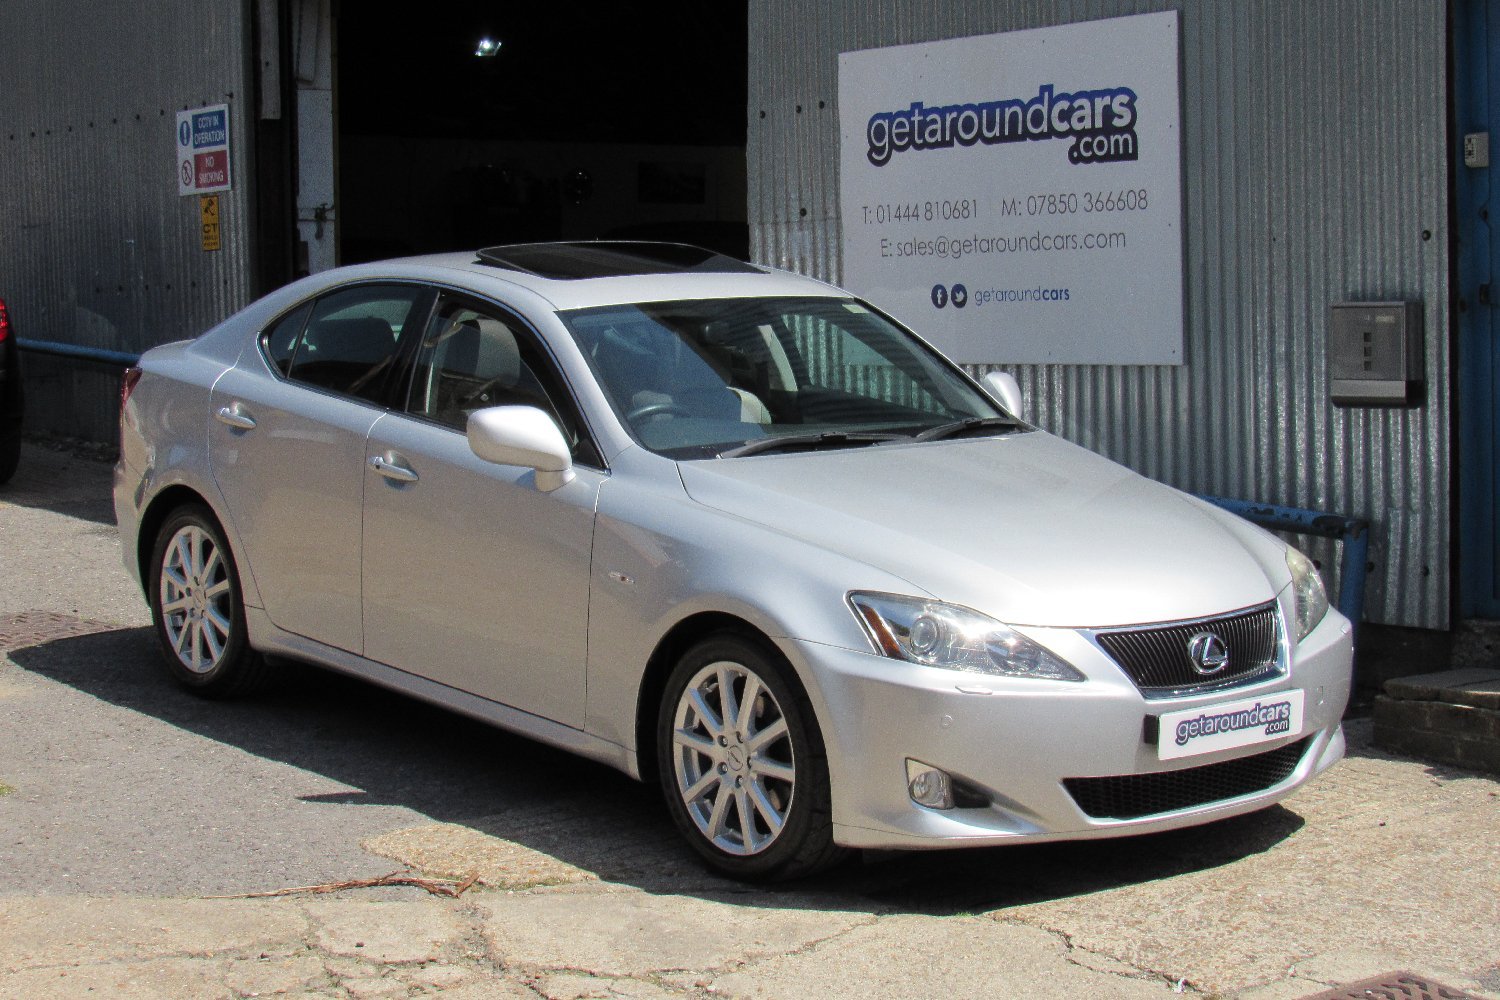 Used LEXUS IS 250 in Ansty, West Sussex